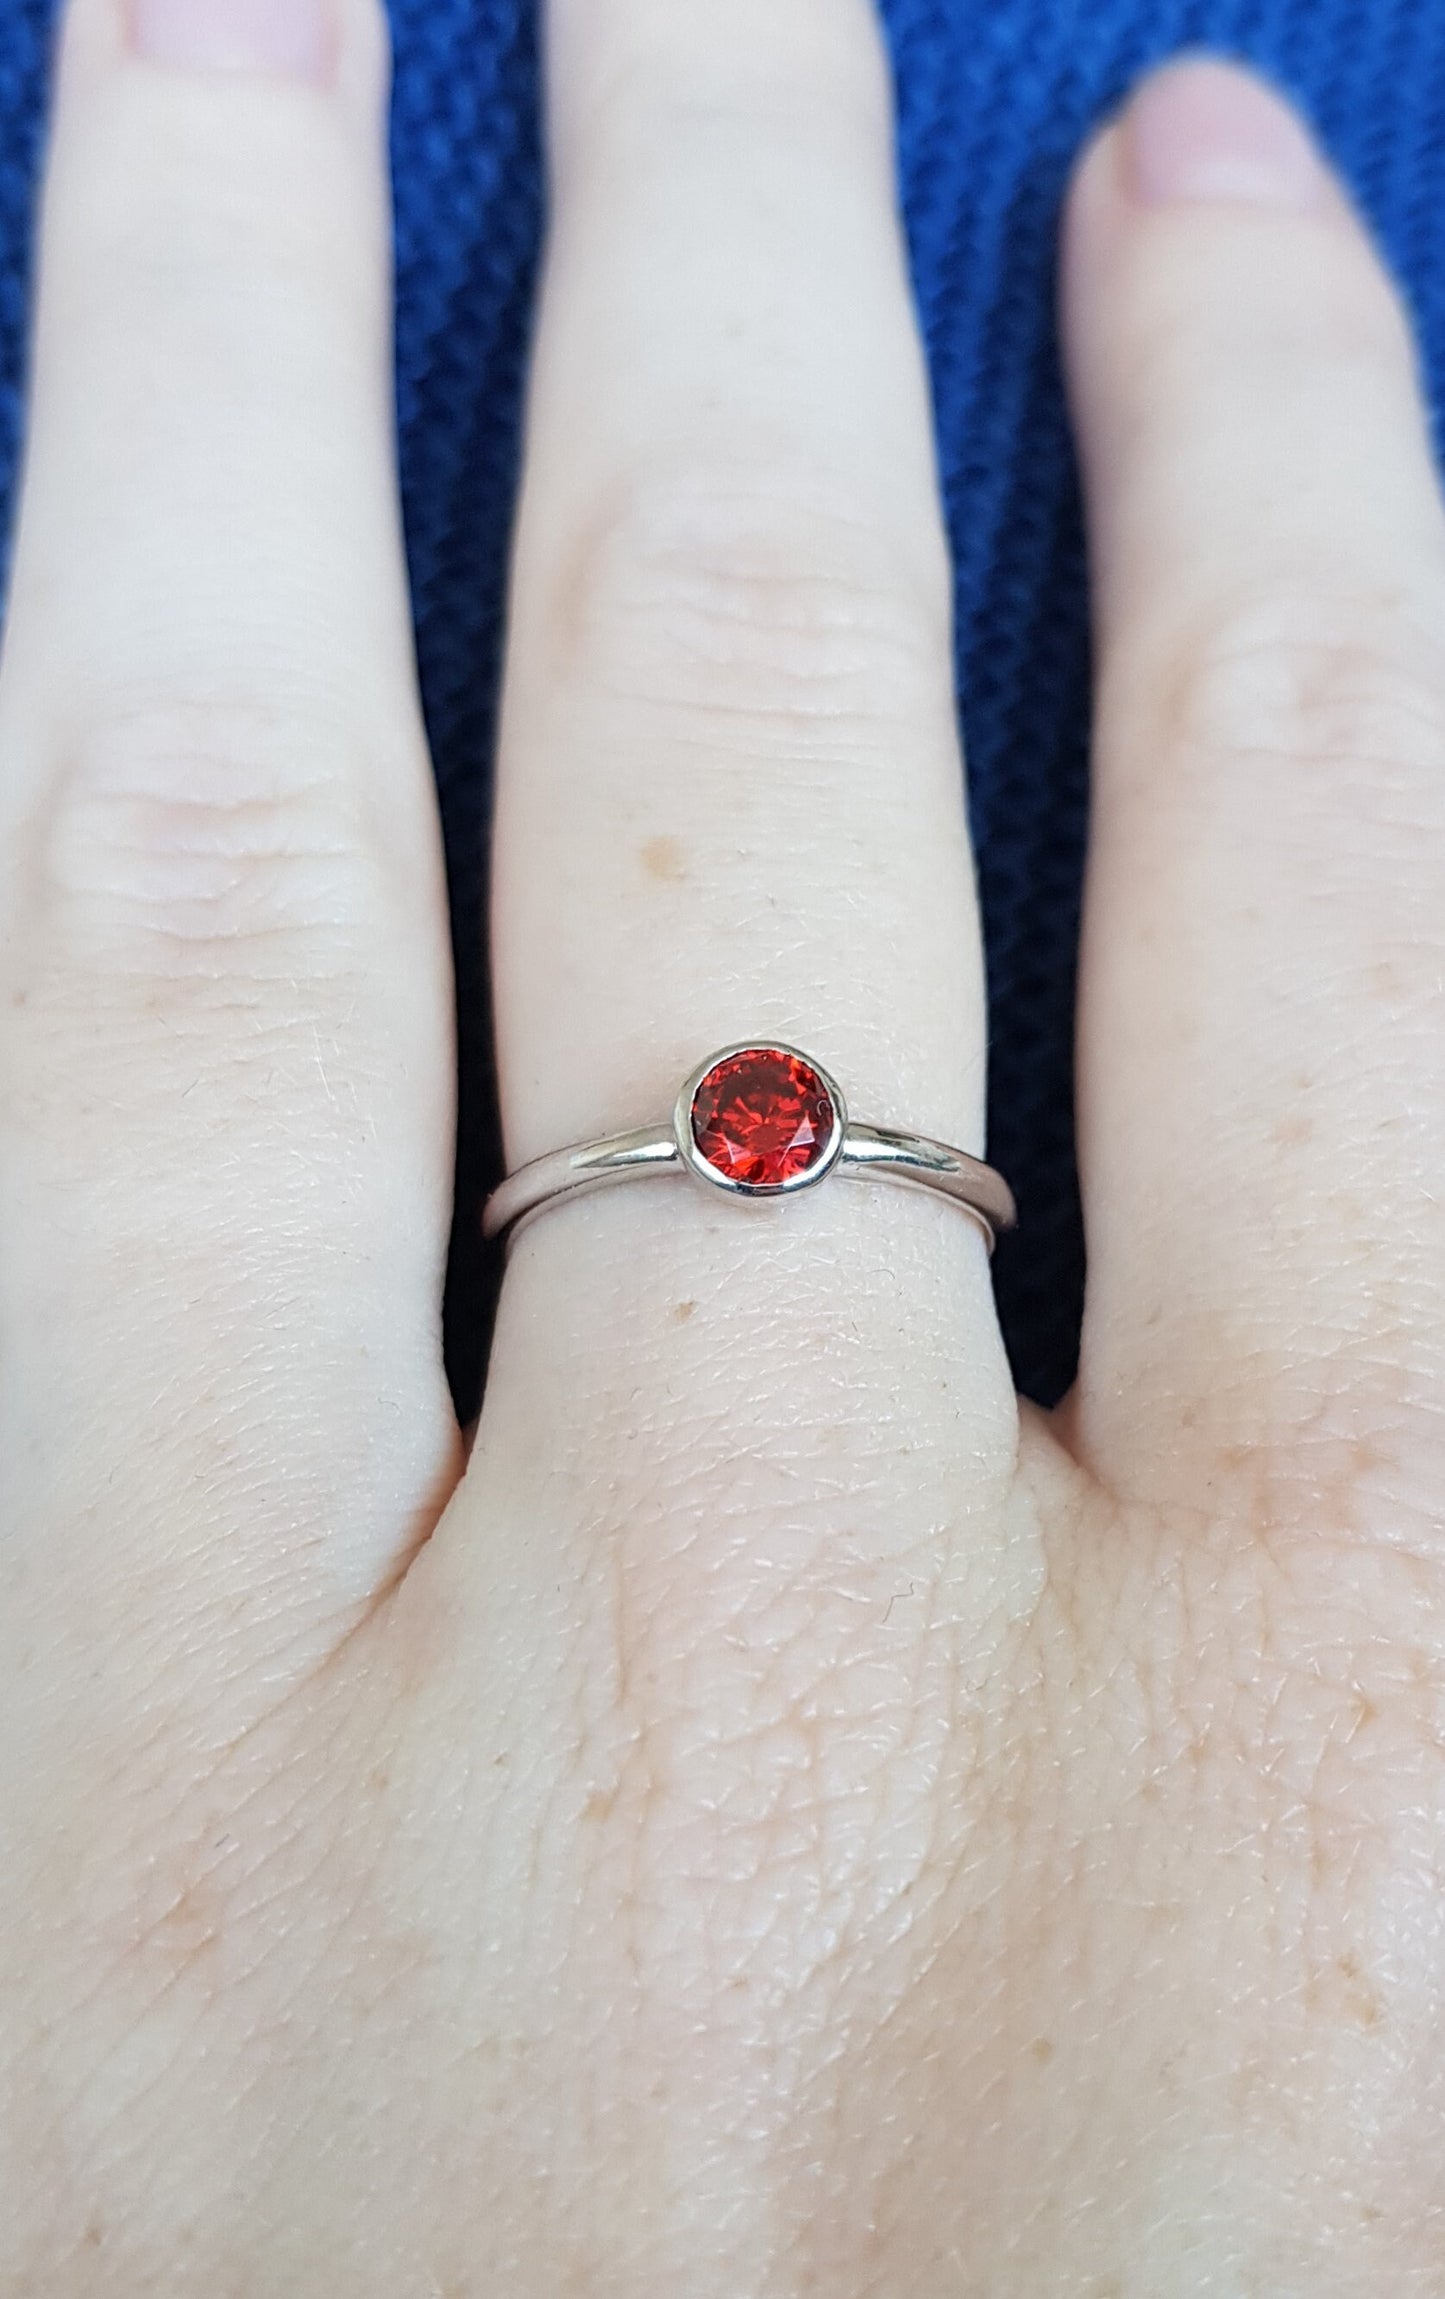 Natural Garnet bezel set solitaire ring - Available in white gold or sterling silver - handmade ring